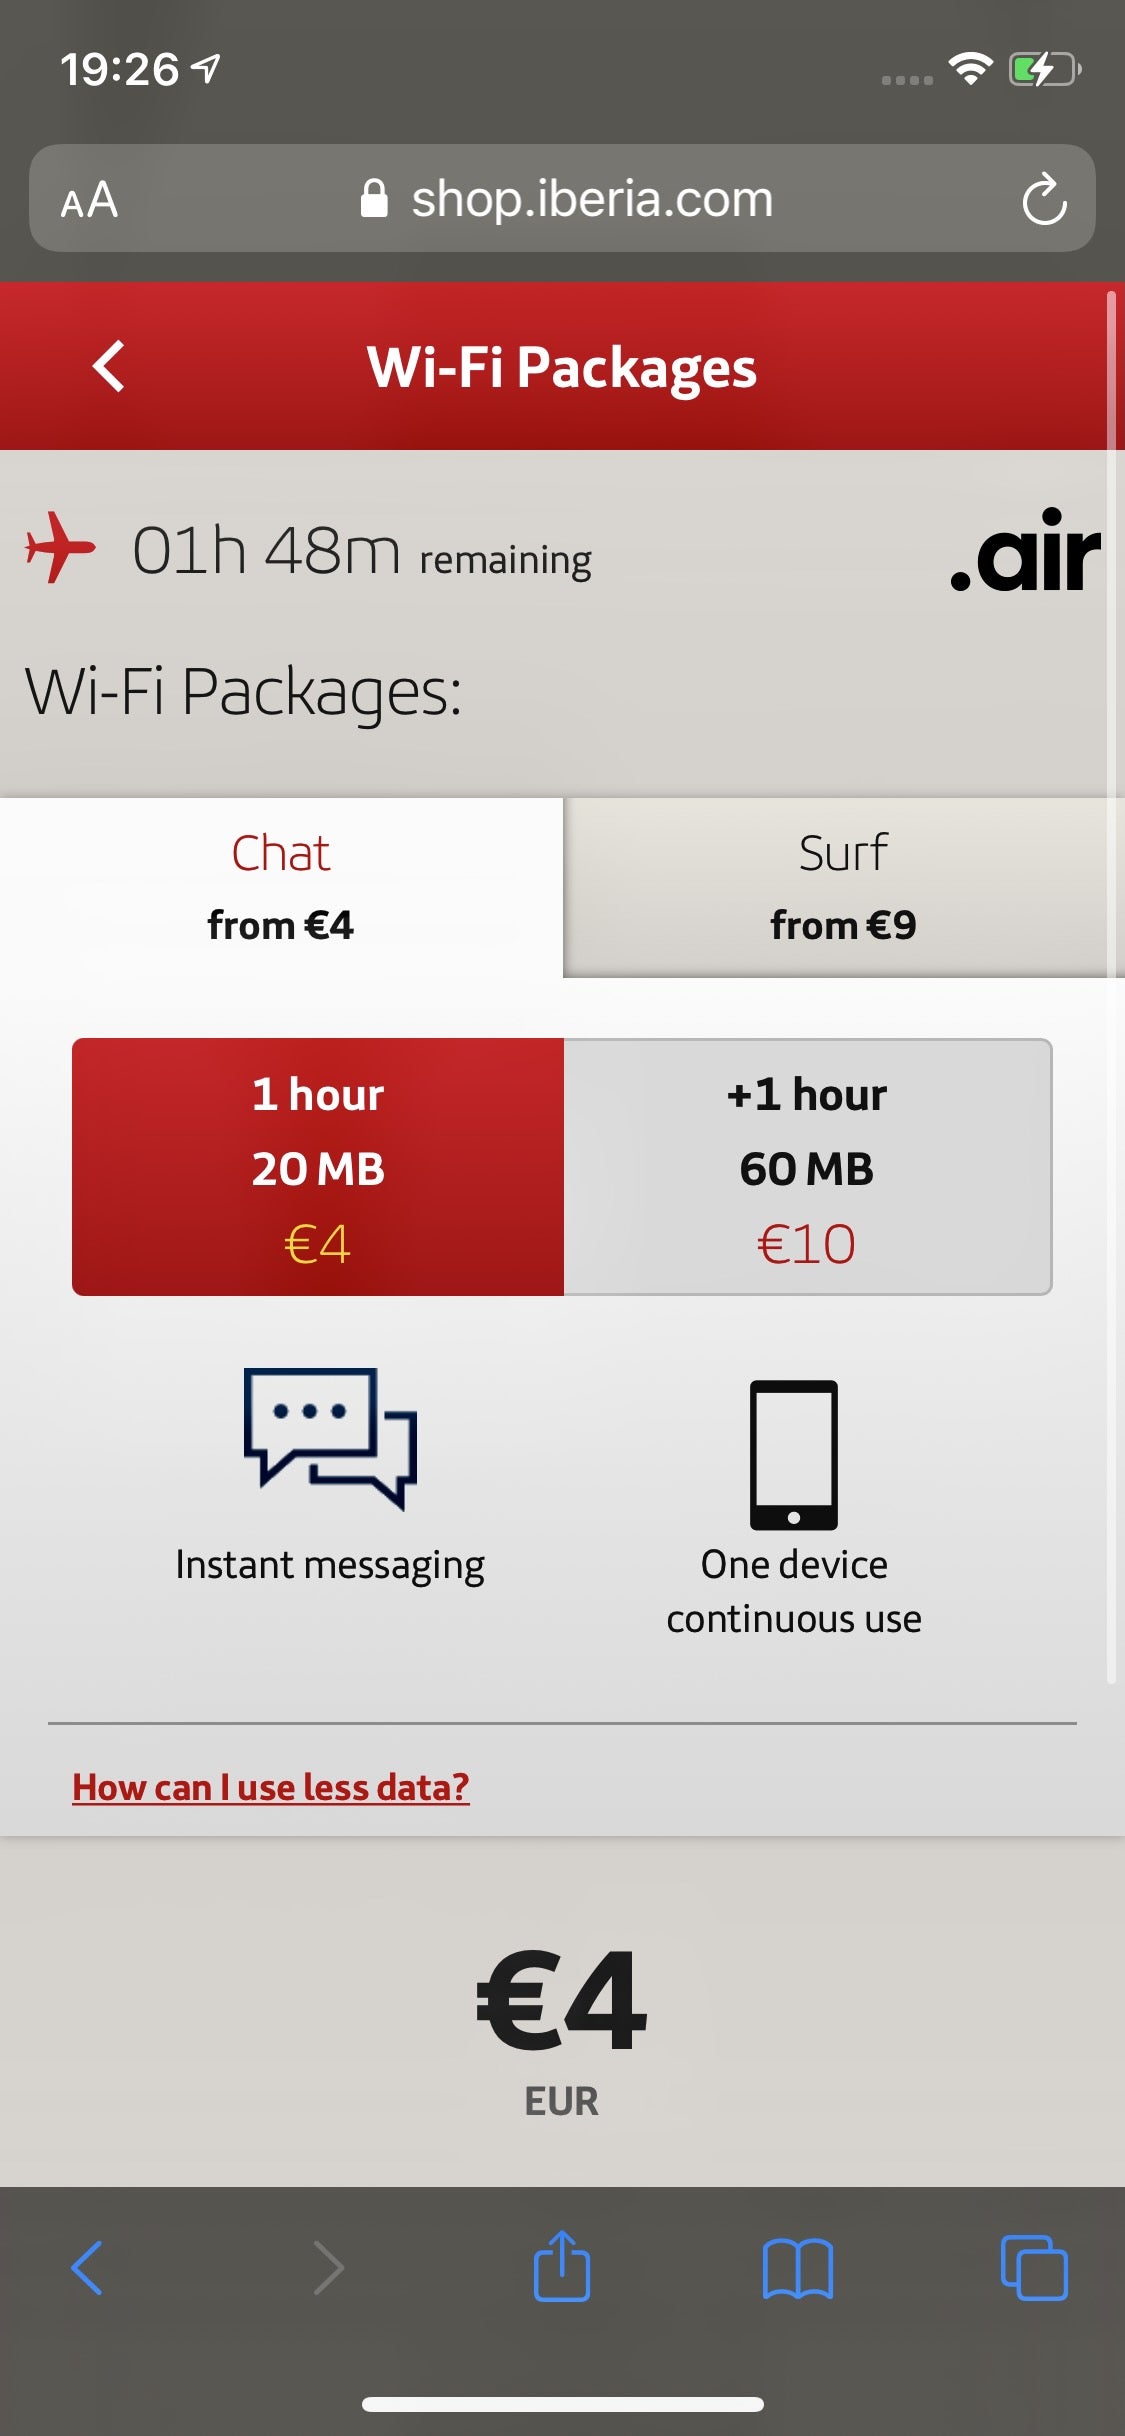 Iberia Wi-Fi Chat packages